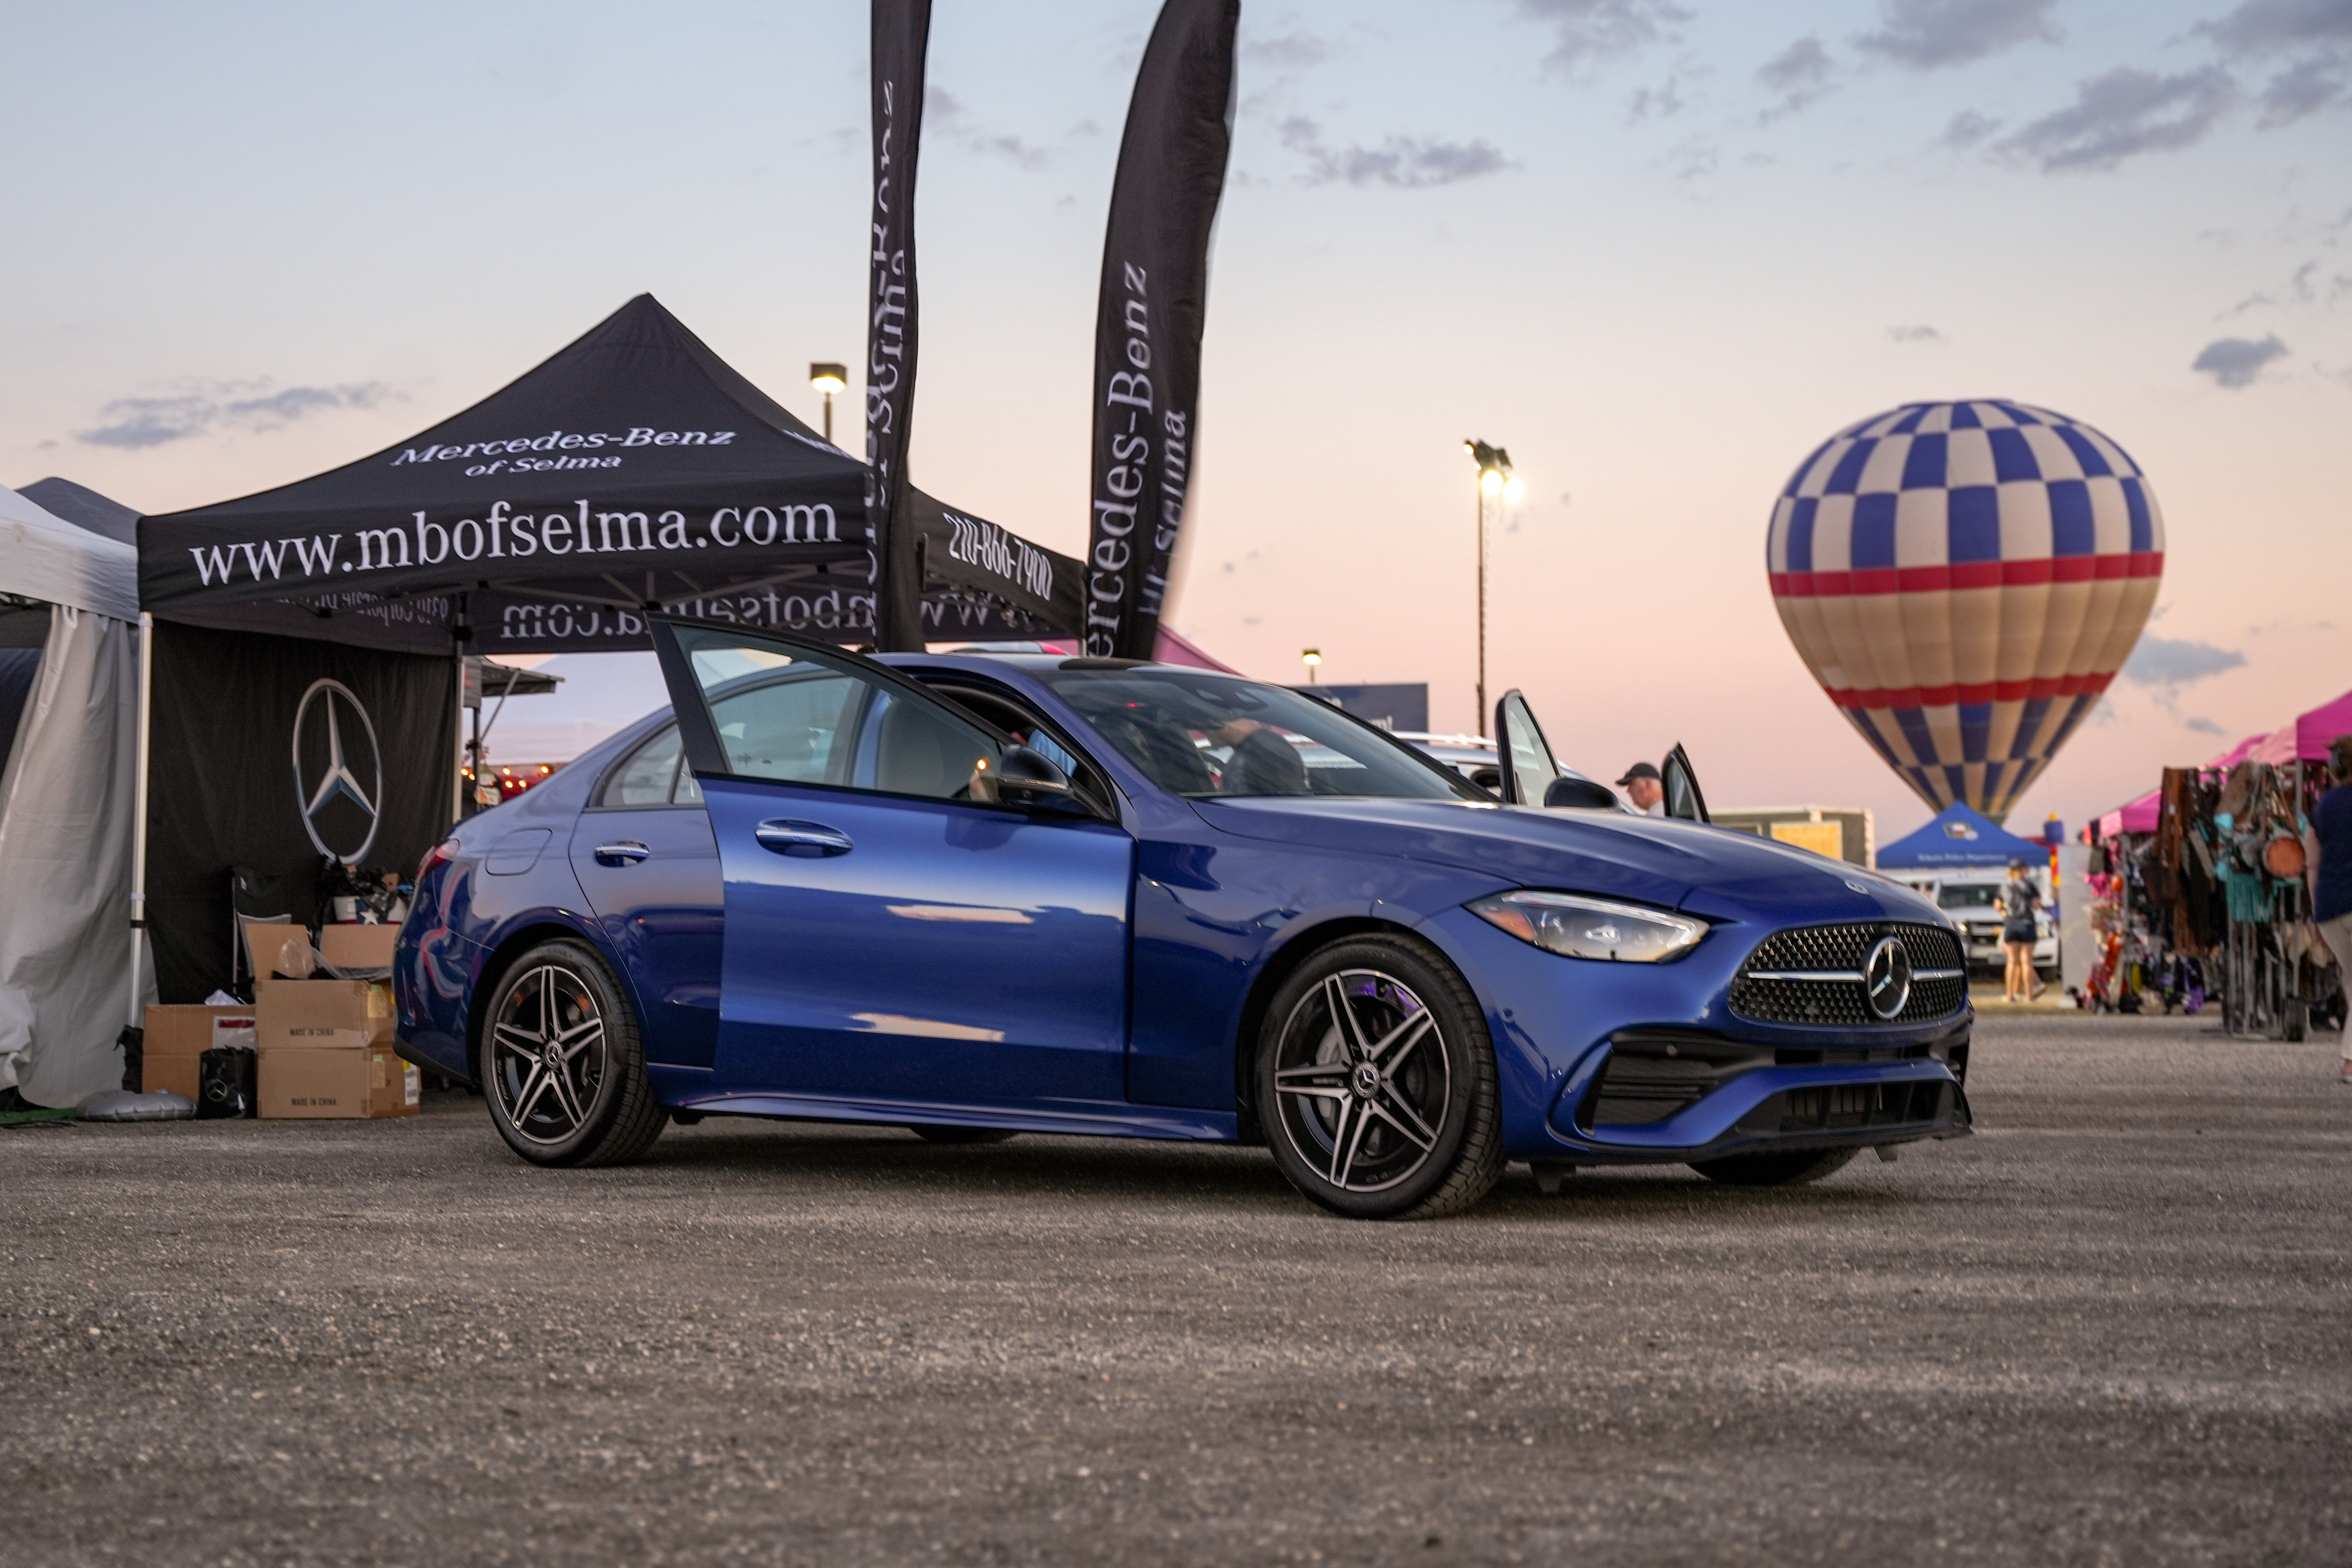 A Mercedes-Benz at the 2023 RE/MAX Skylight Balloon Fest in Selma, TX